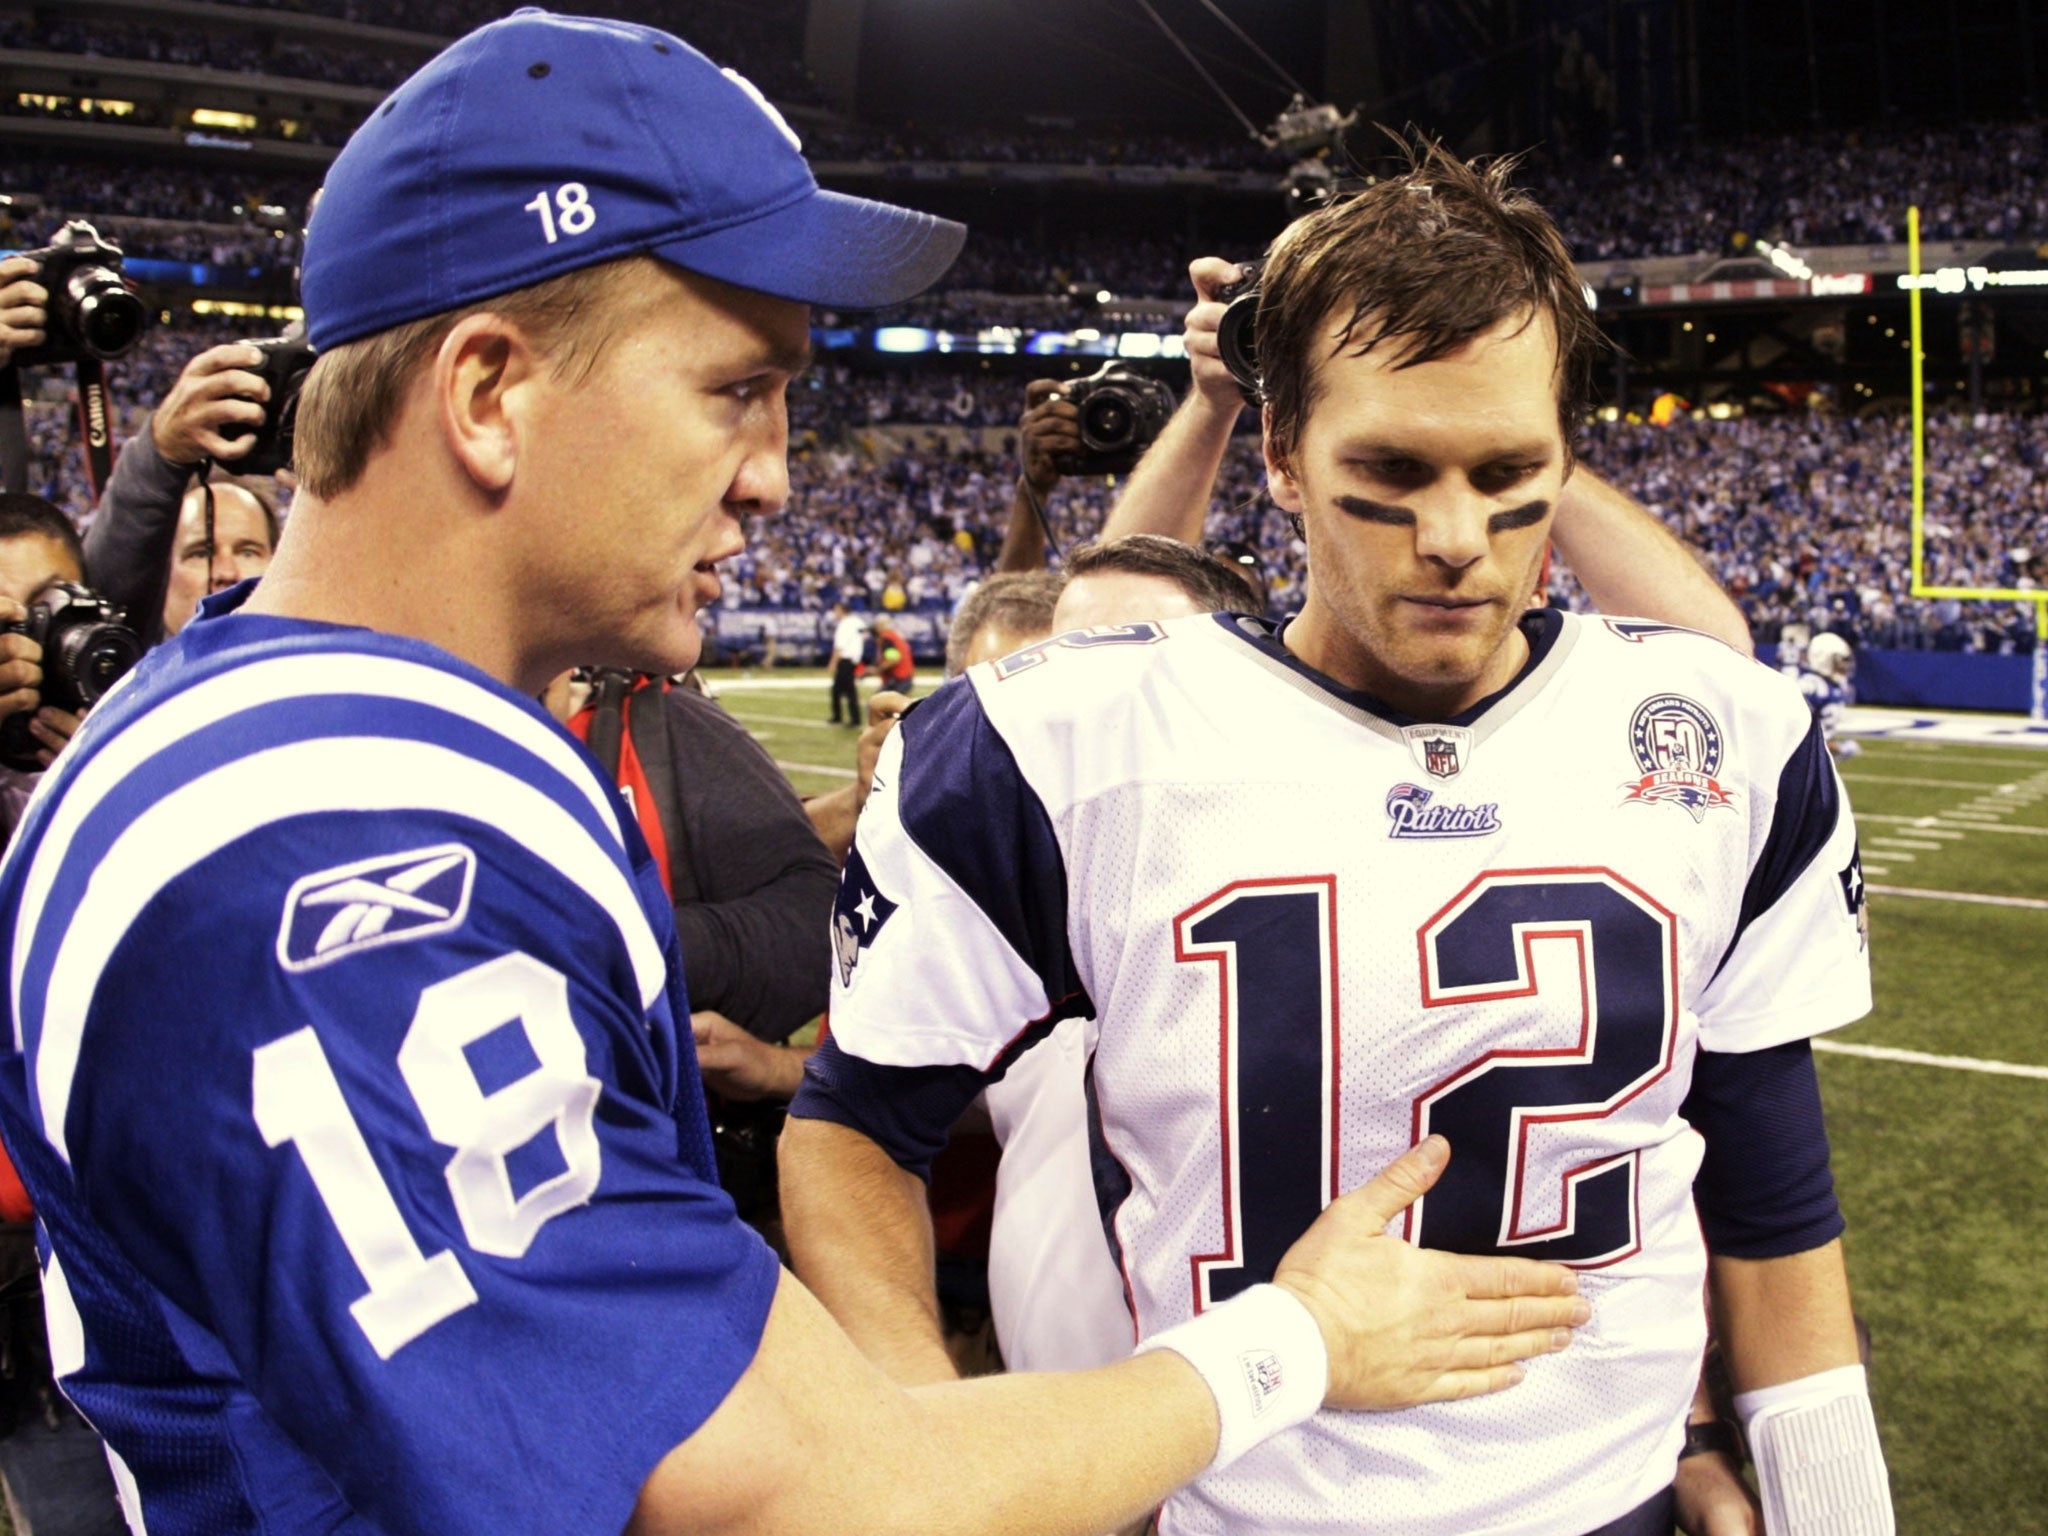 Quarterback Peyton Manning (left) then of the Indianapolis Colts greets Tom Brady (right) of the New England Patriots